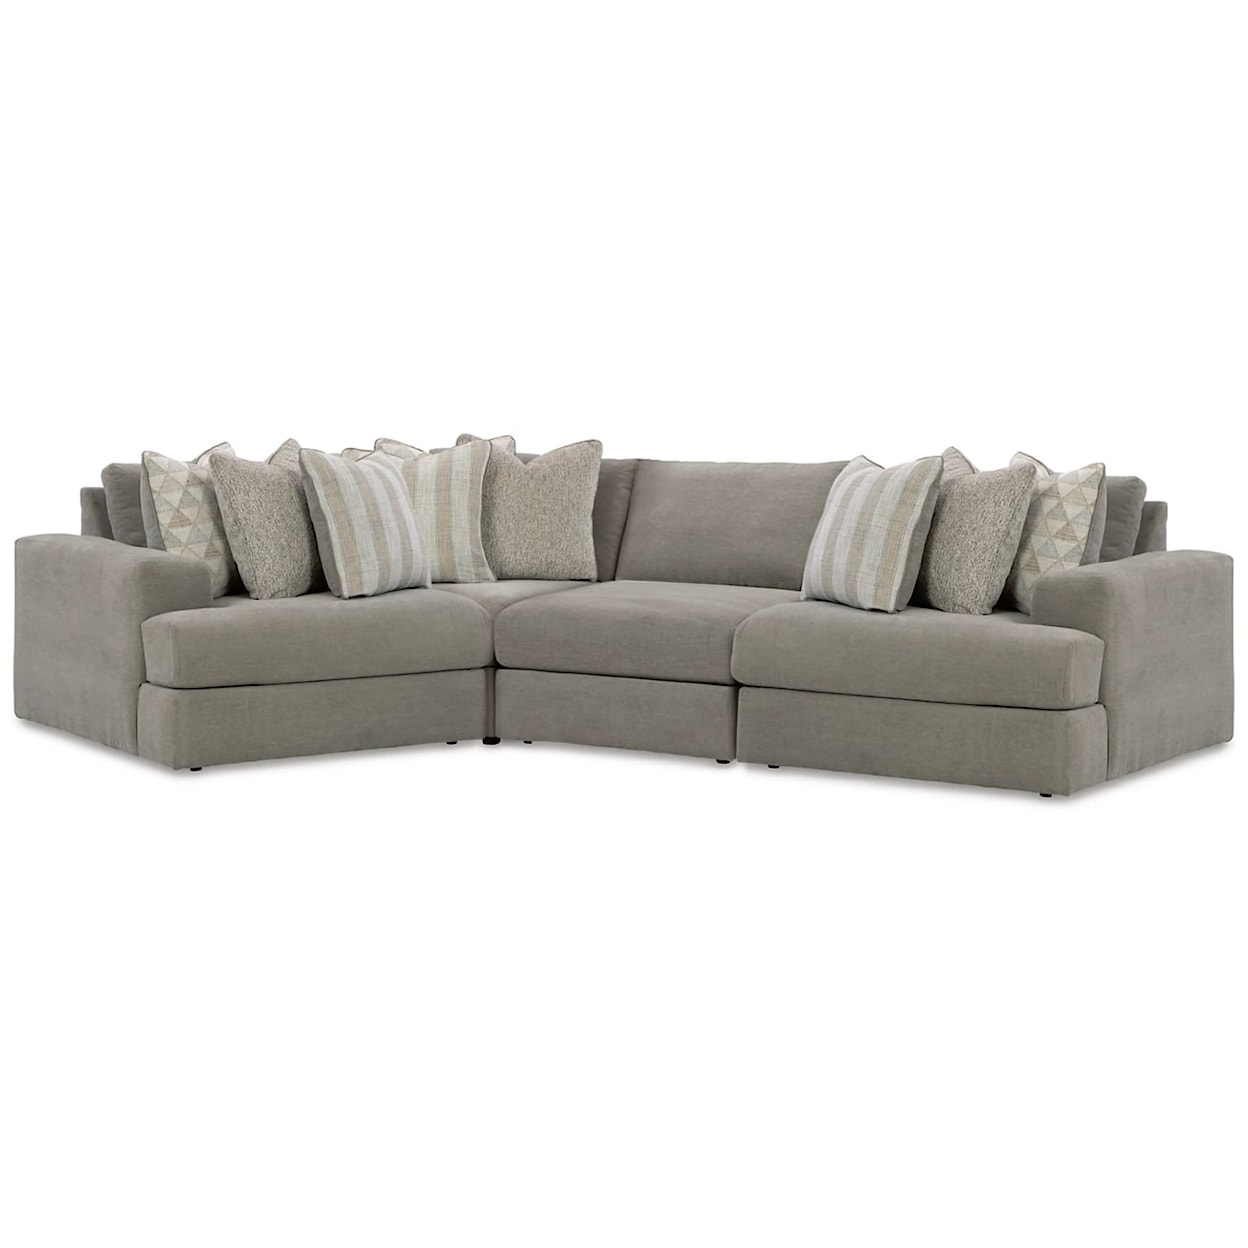 Signature Design by Ashley Furniture Avaliyah 4-Piece Sectional